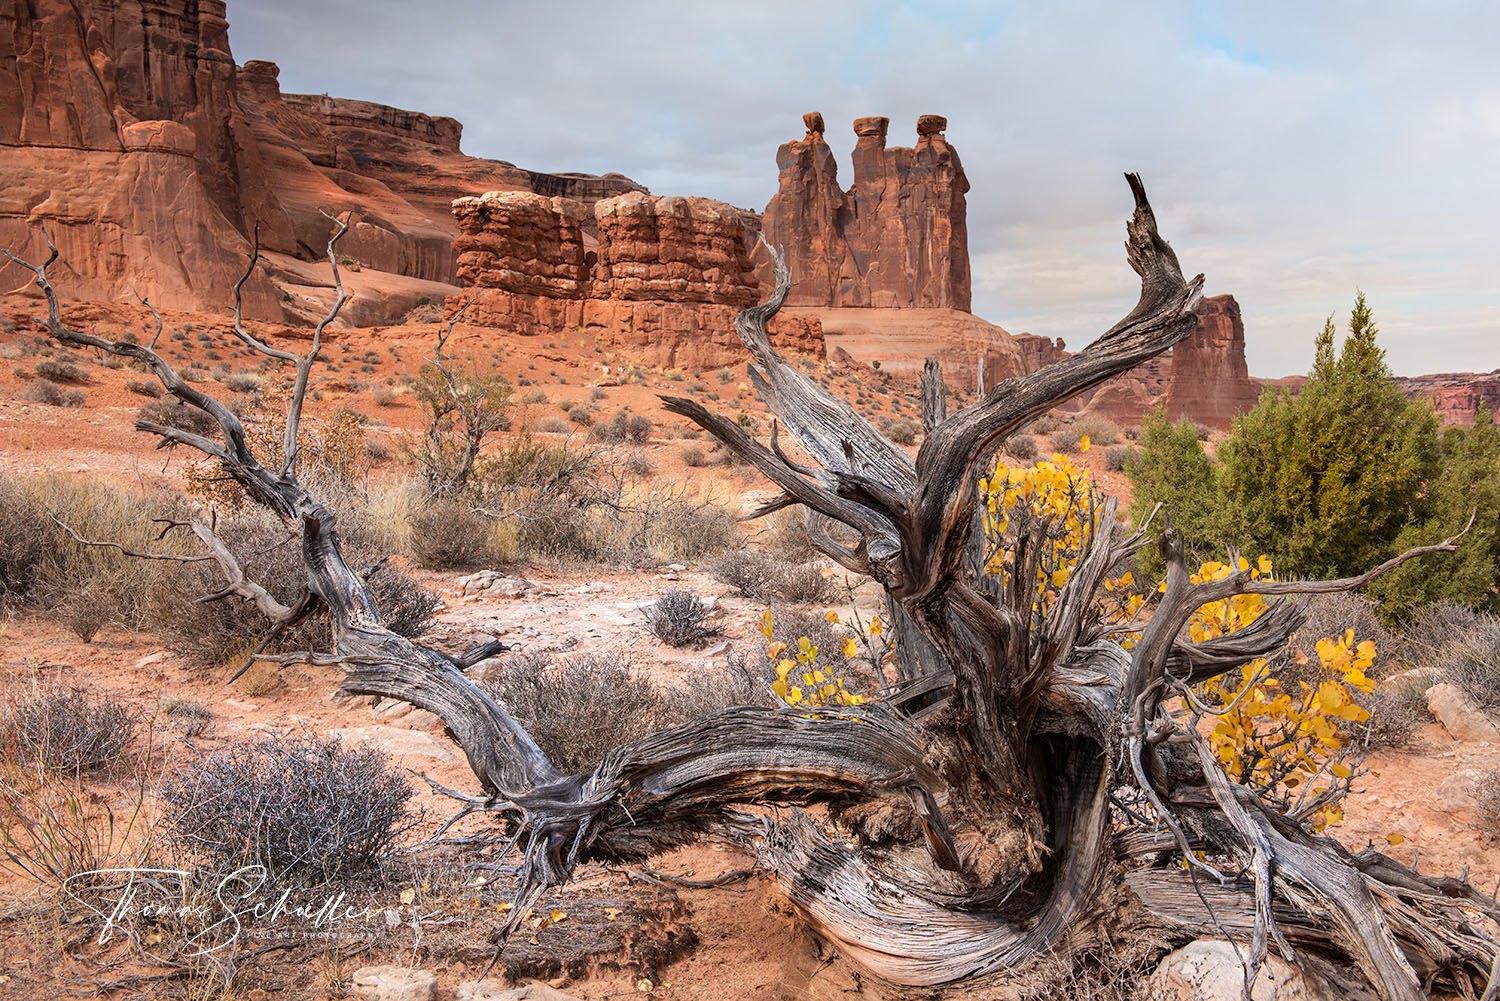 Desert Southwest scene from Arches National Park including a gnarly old Juniper skeleton under the Three Gossips near Park Avenue | Limited Edition Prints